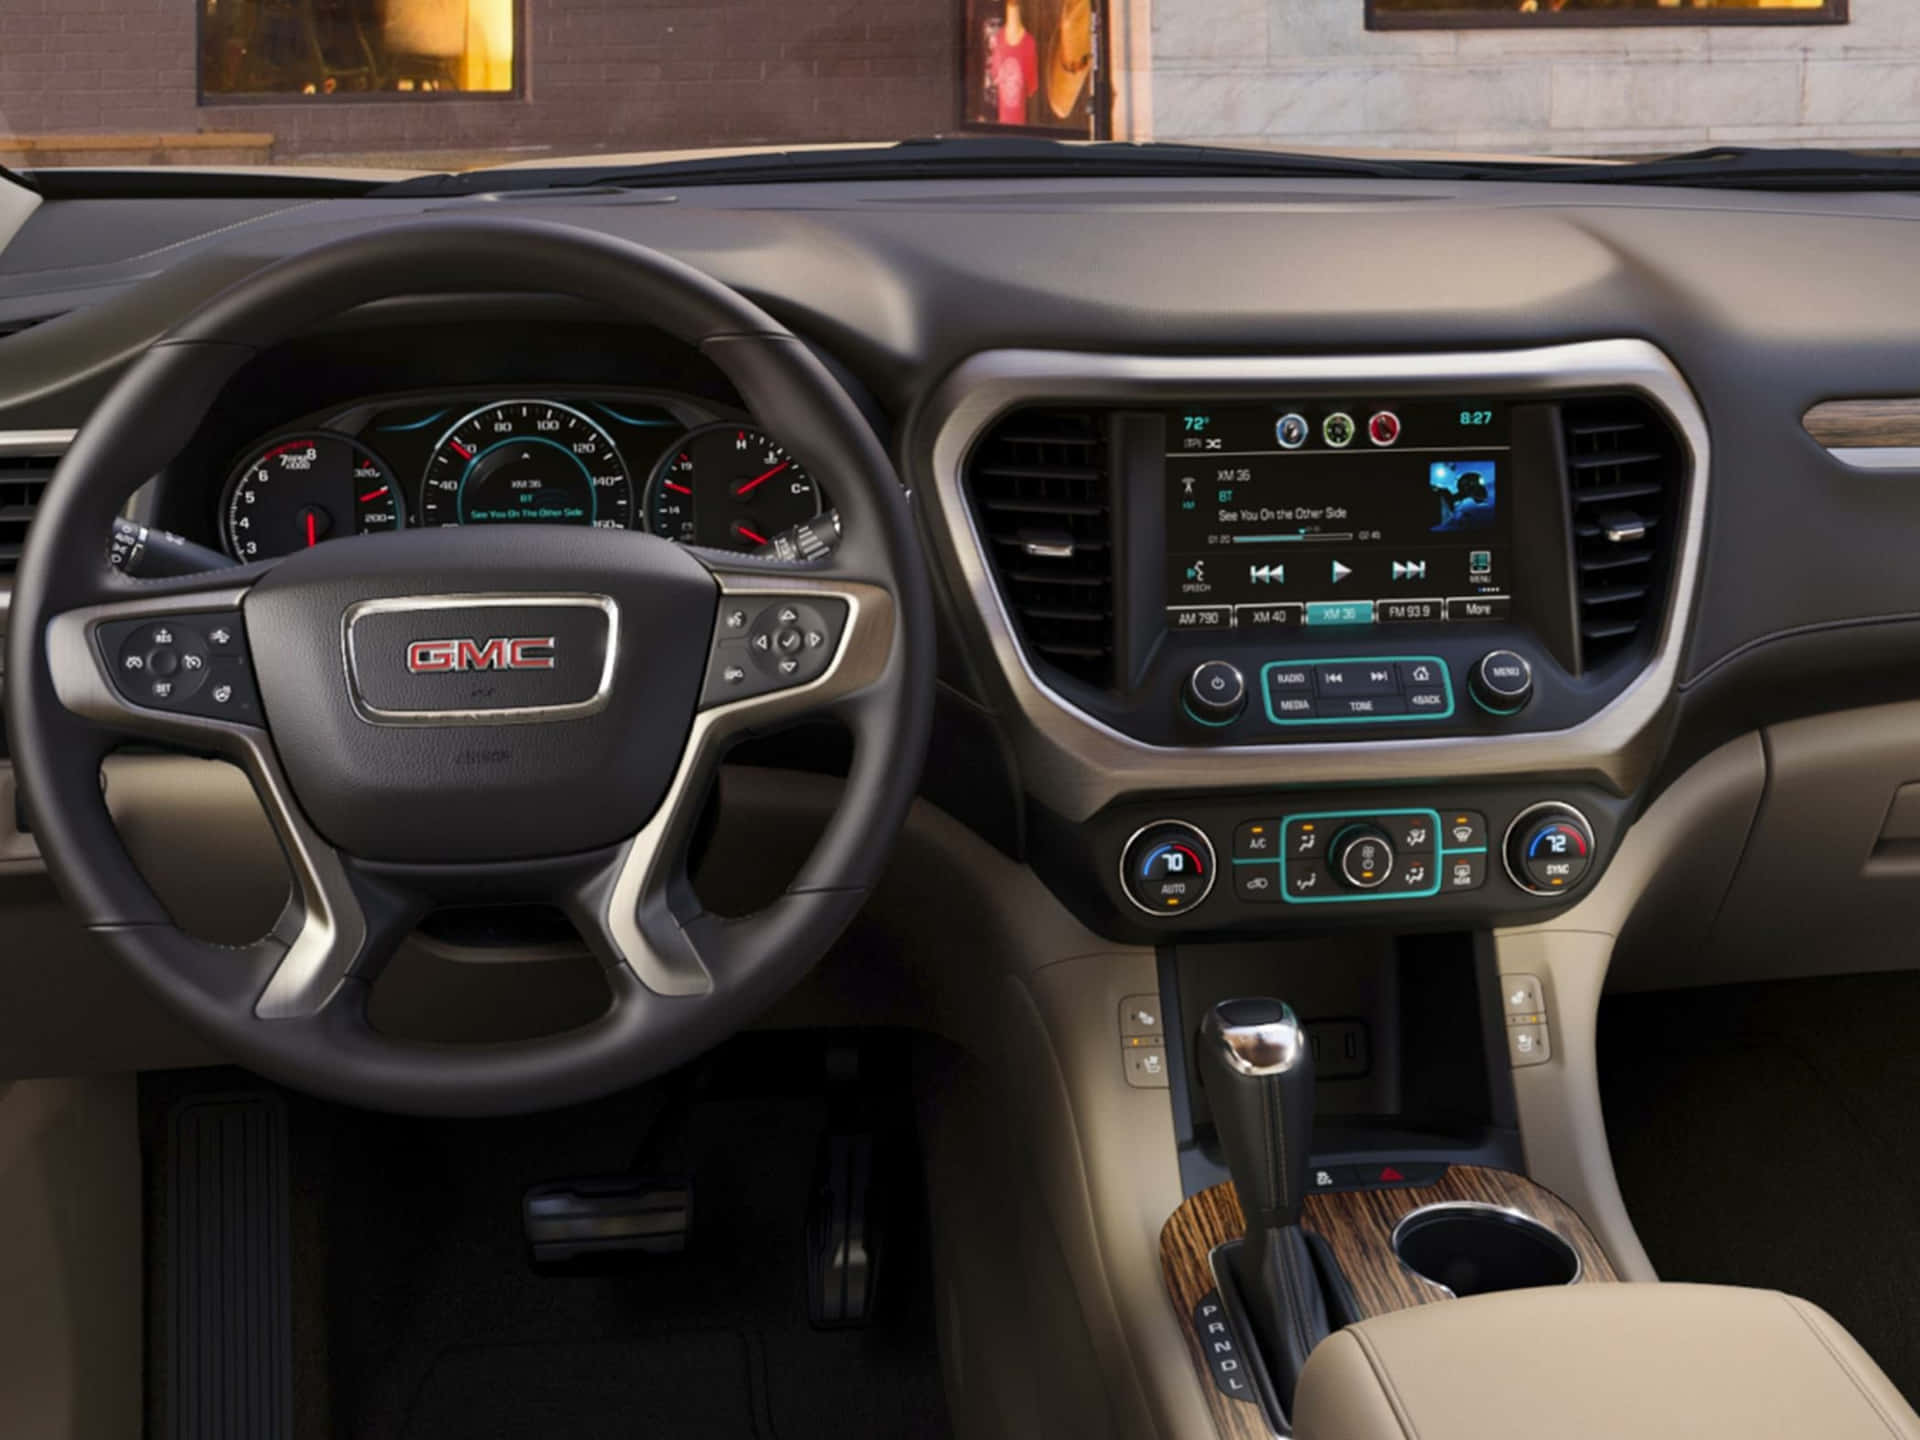 Stunning GMC Acadia showcasing its sleek design and powerful presence on the road. Wallpaper